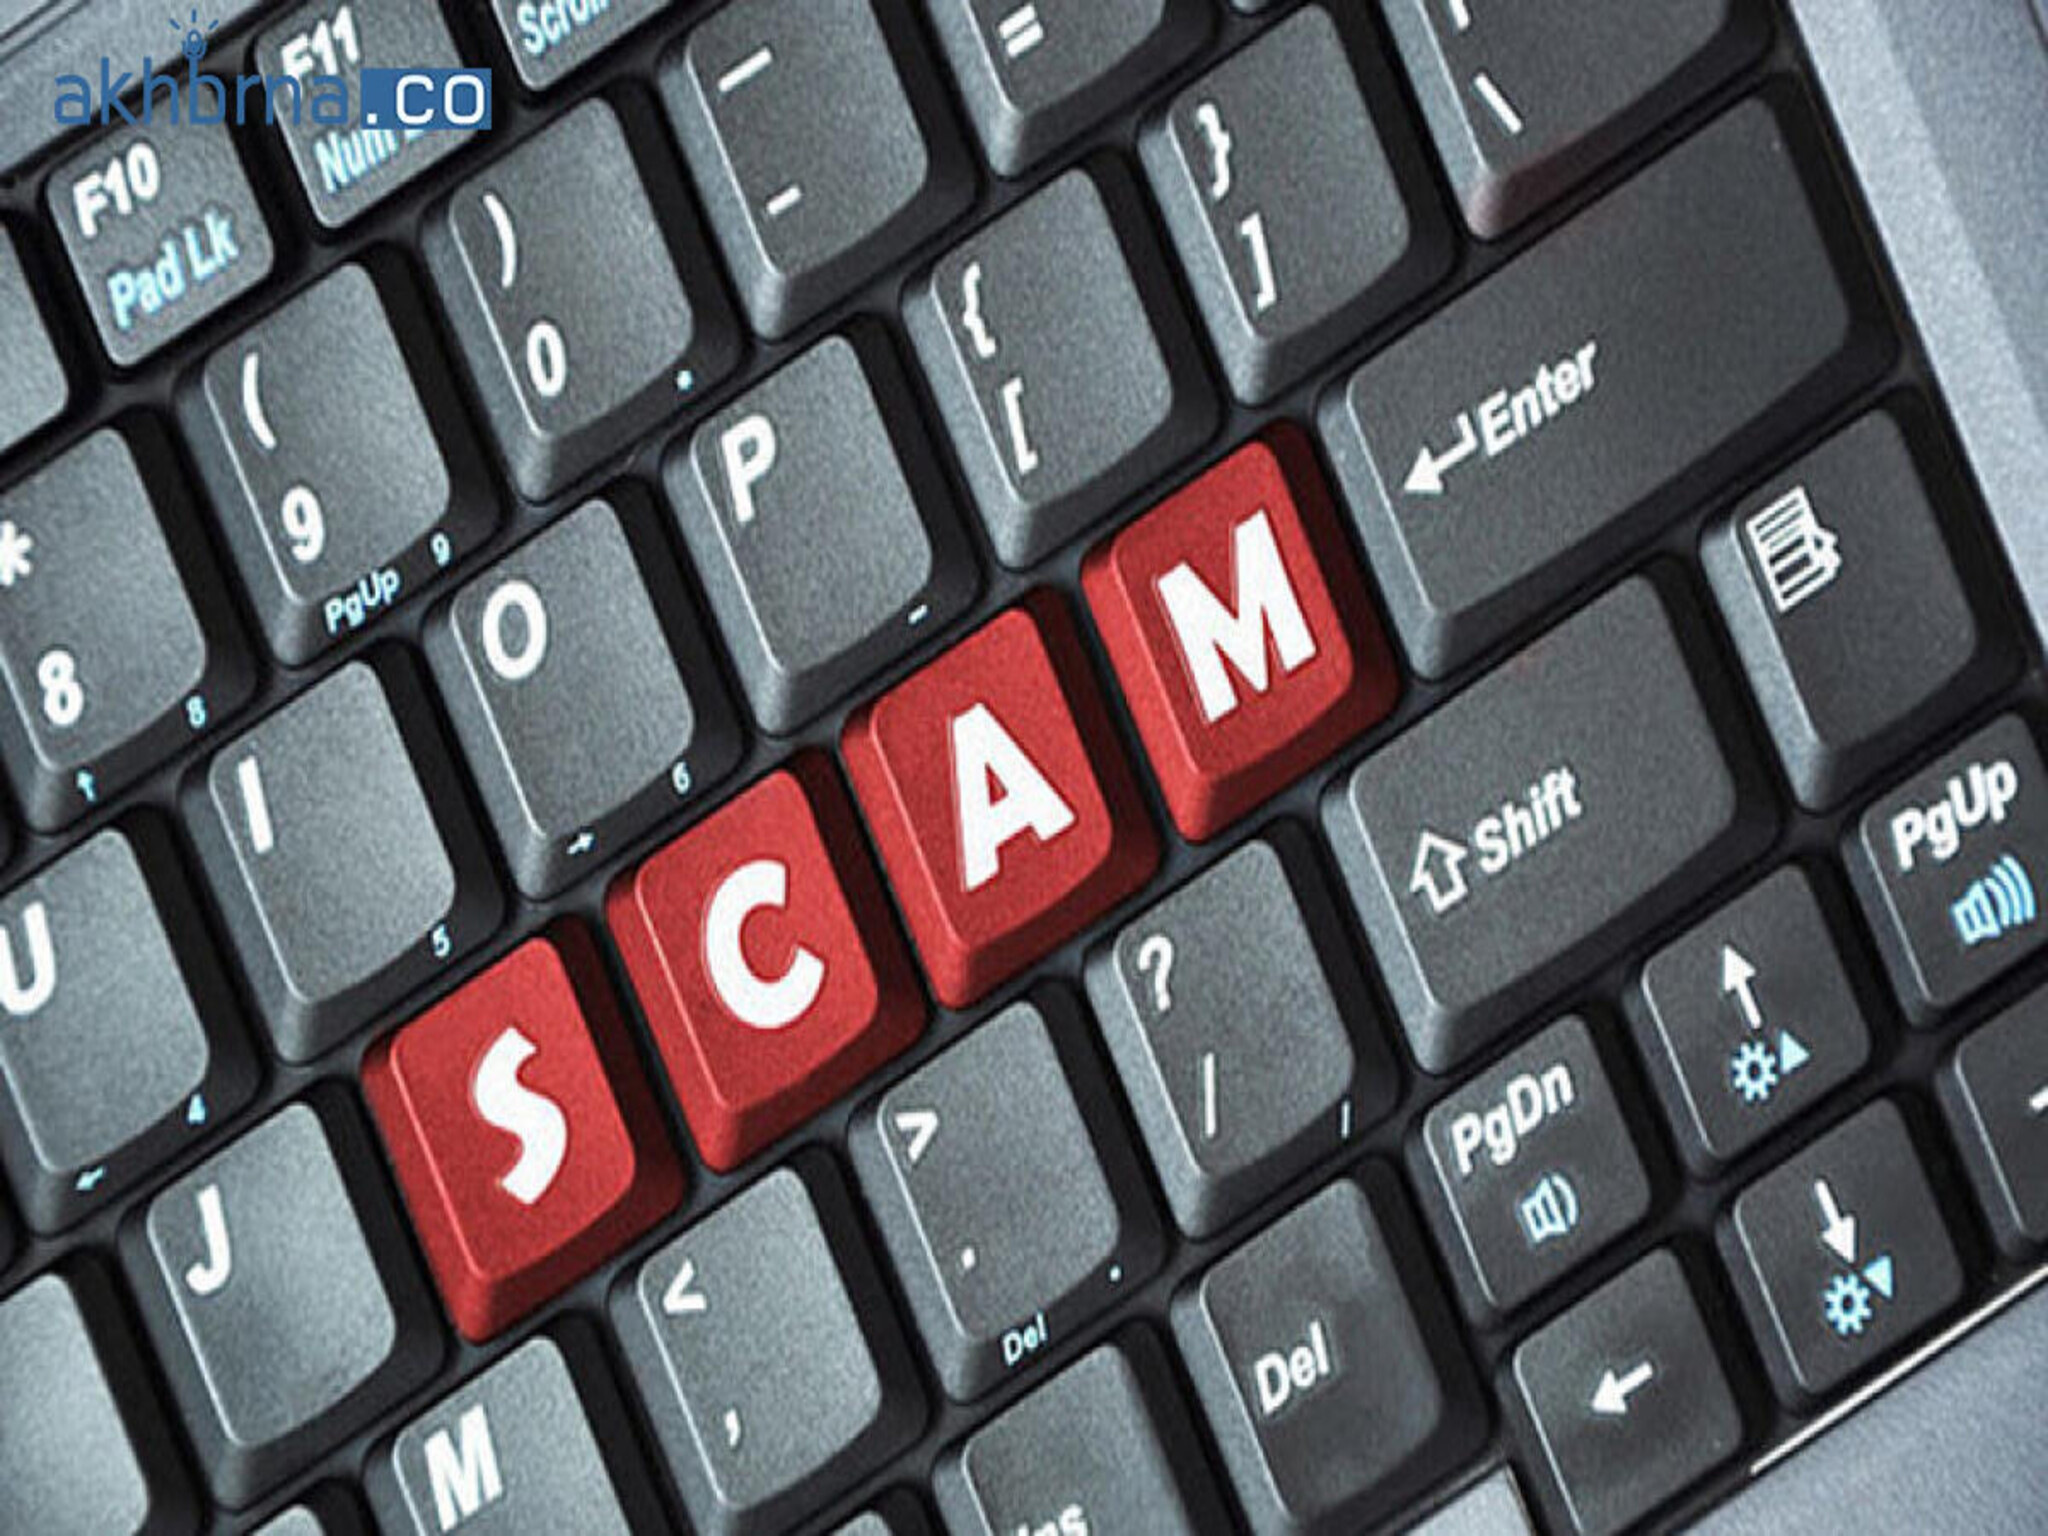 UAE: Expat loses Dh1.8 million in scams targeting all four businesses 